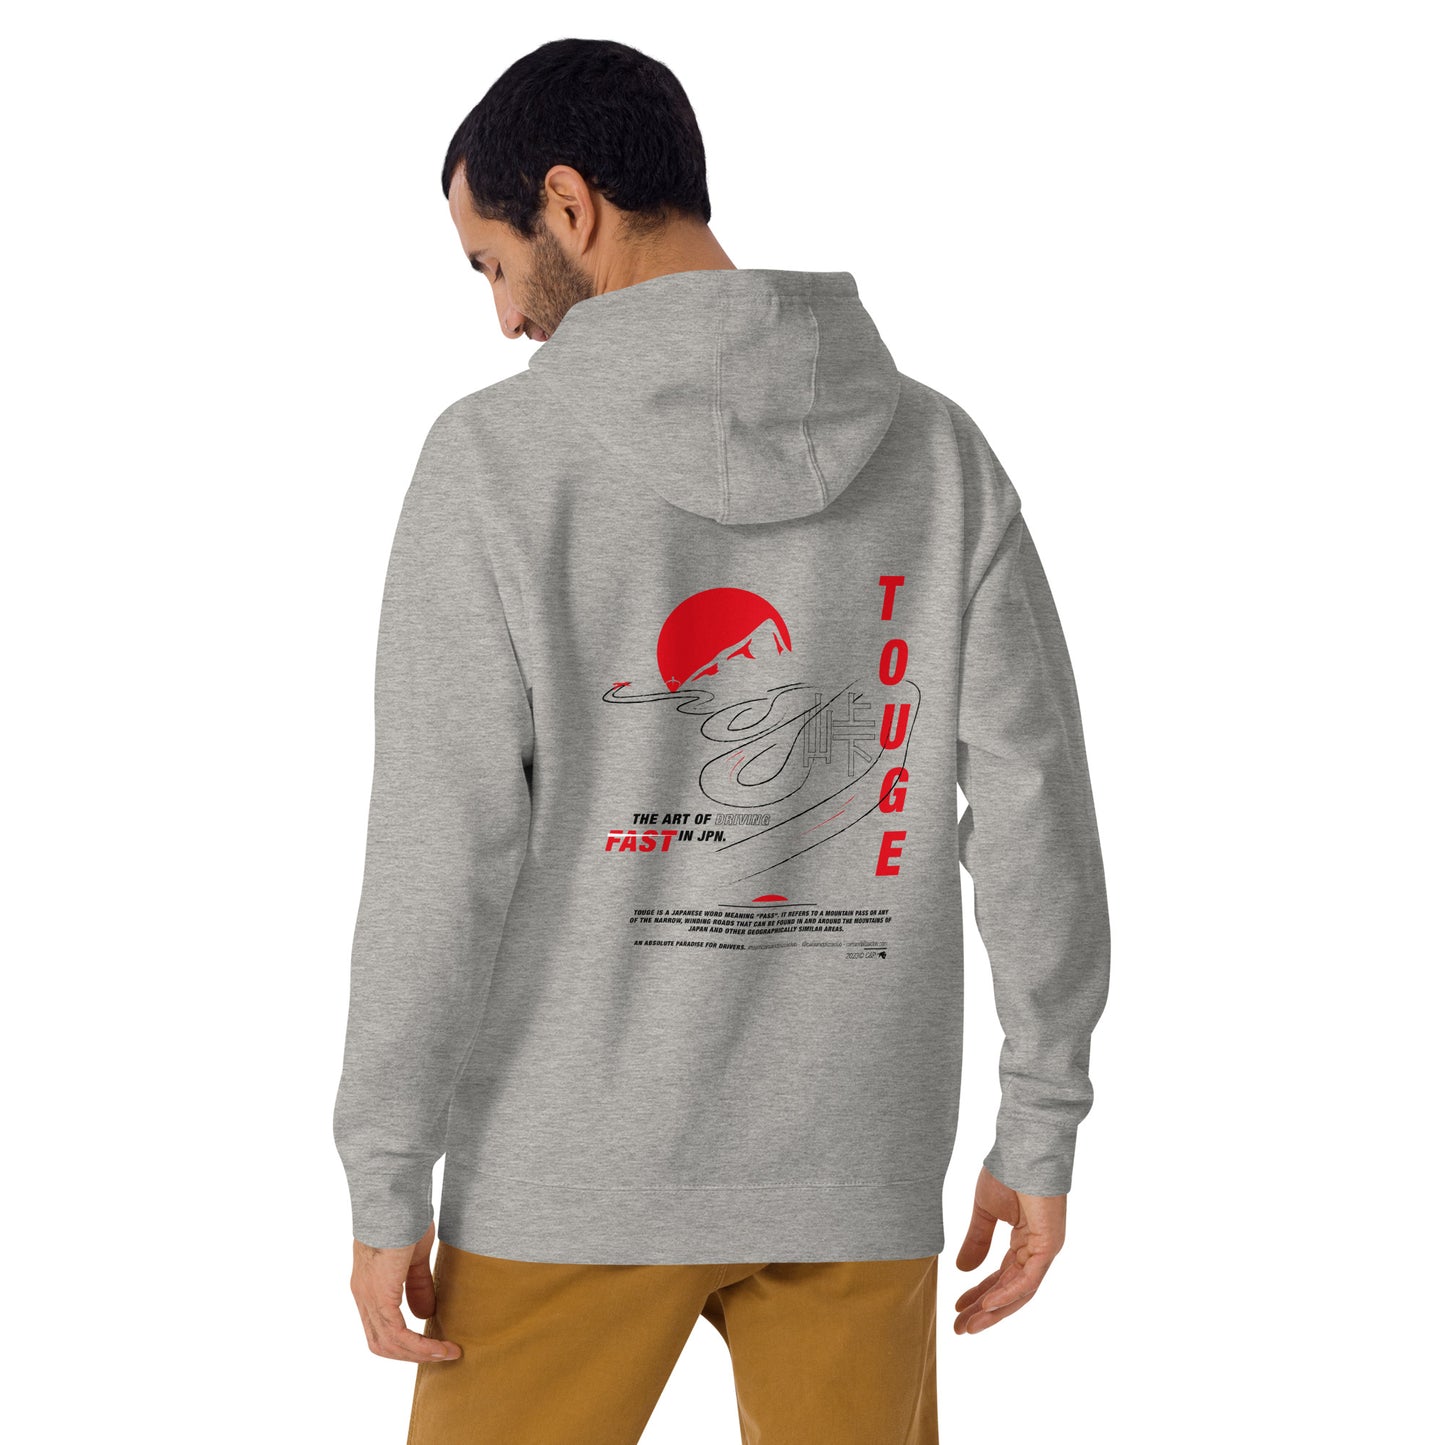 Unisex Hoodie "Touge Edition"